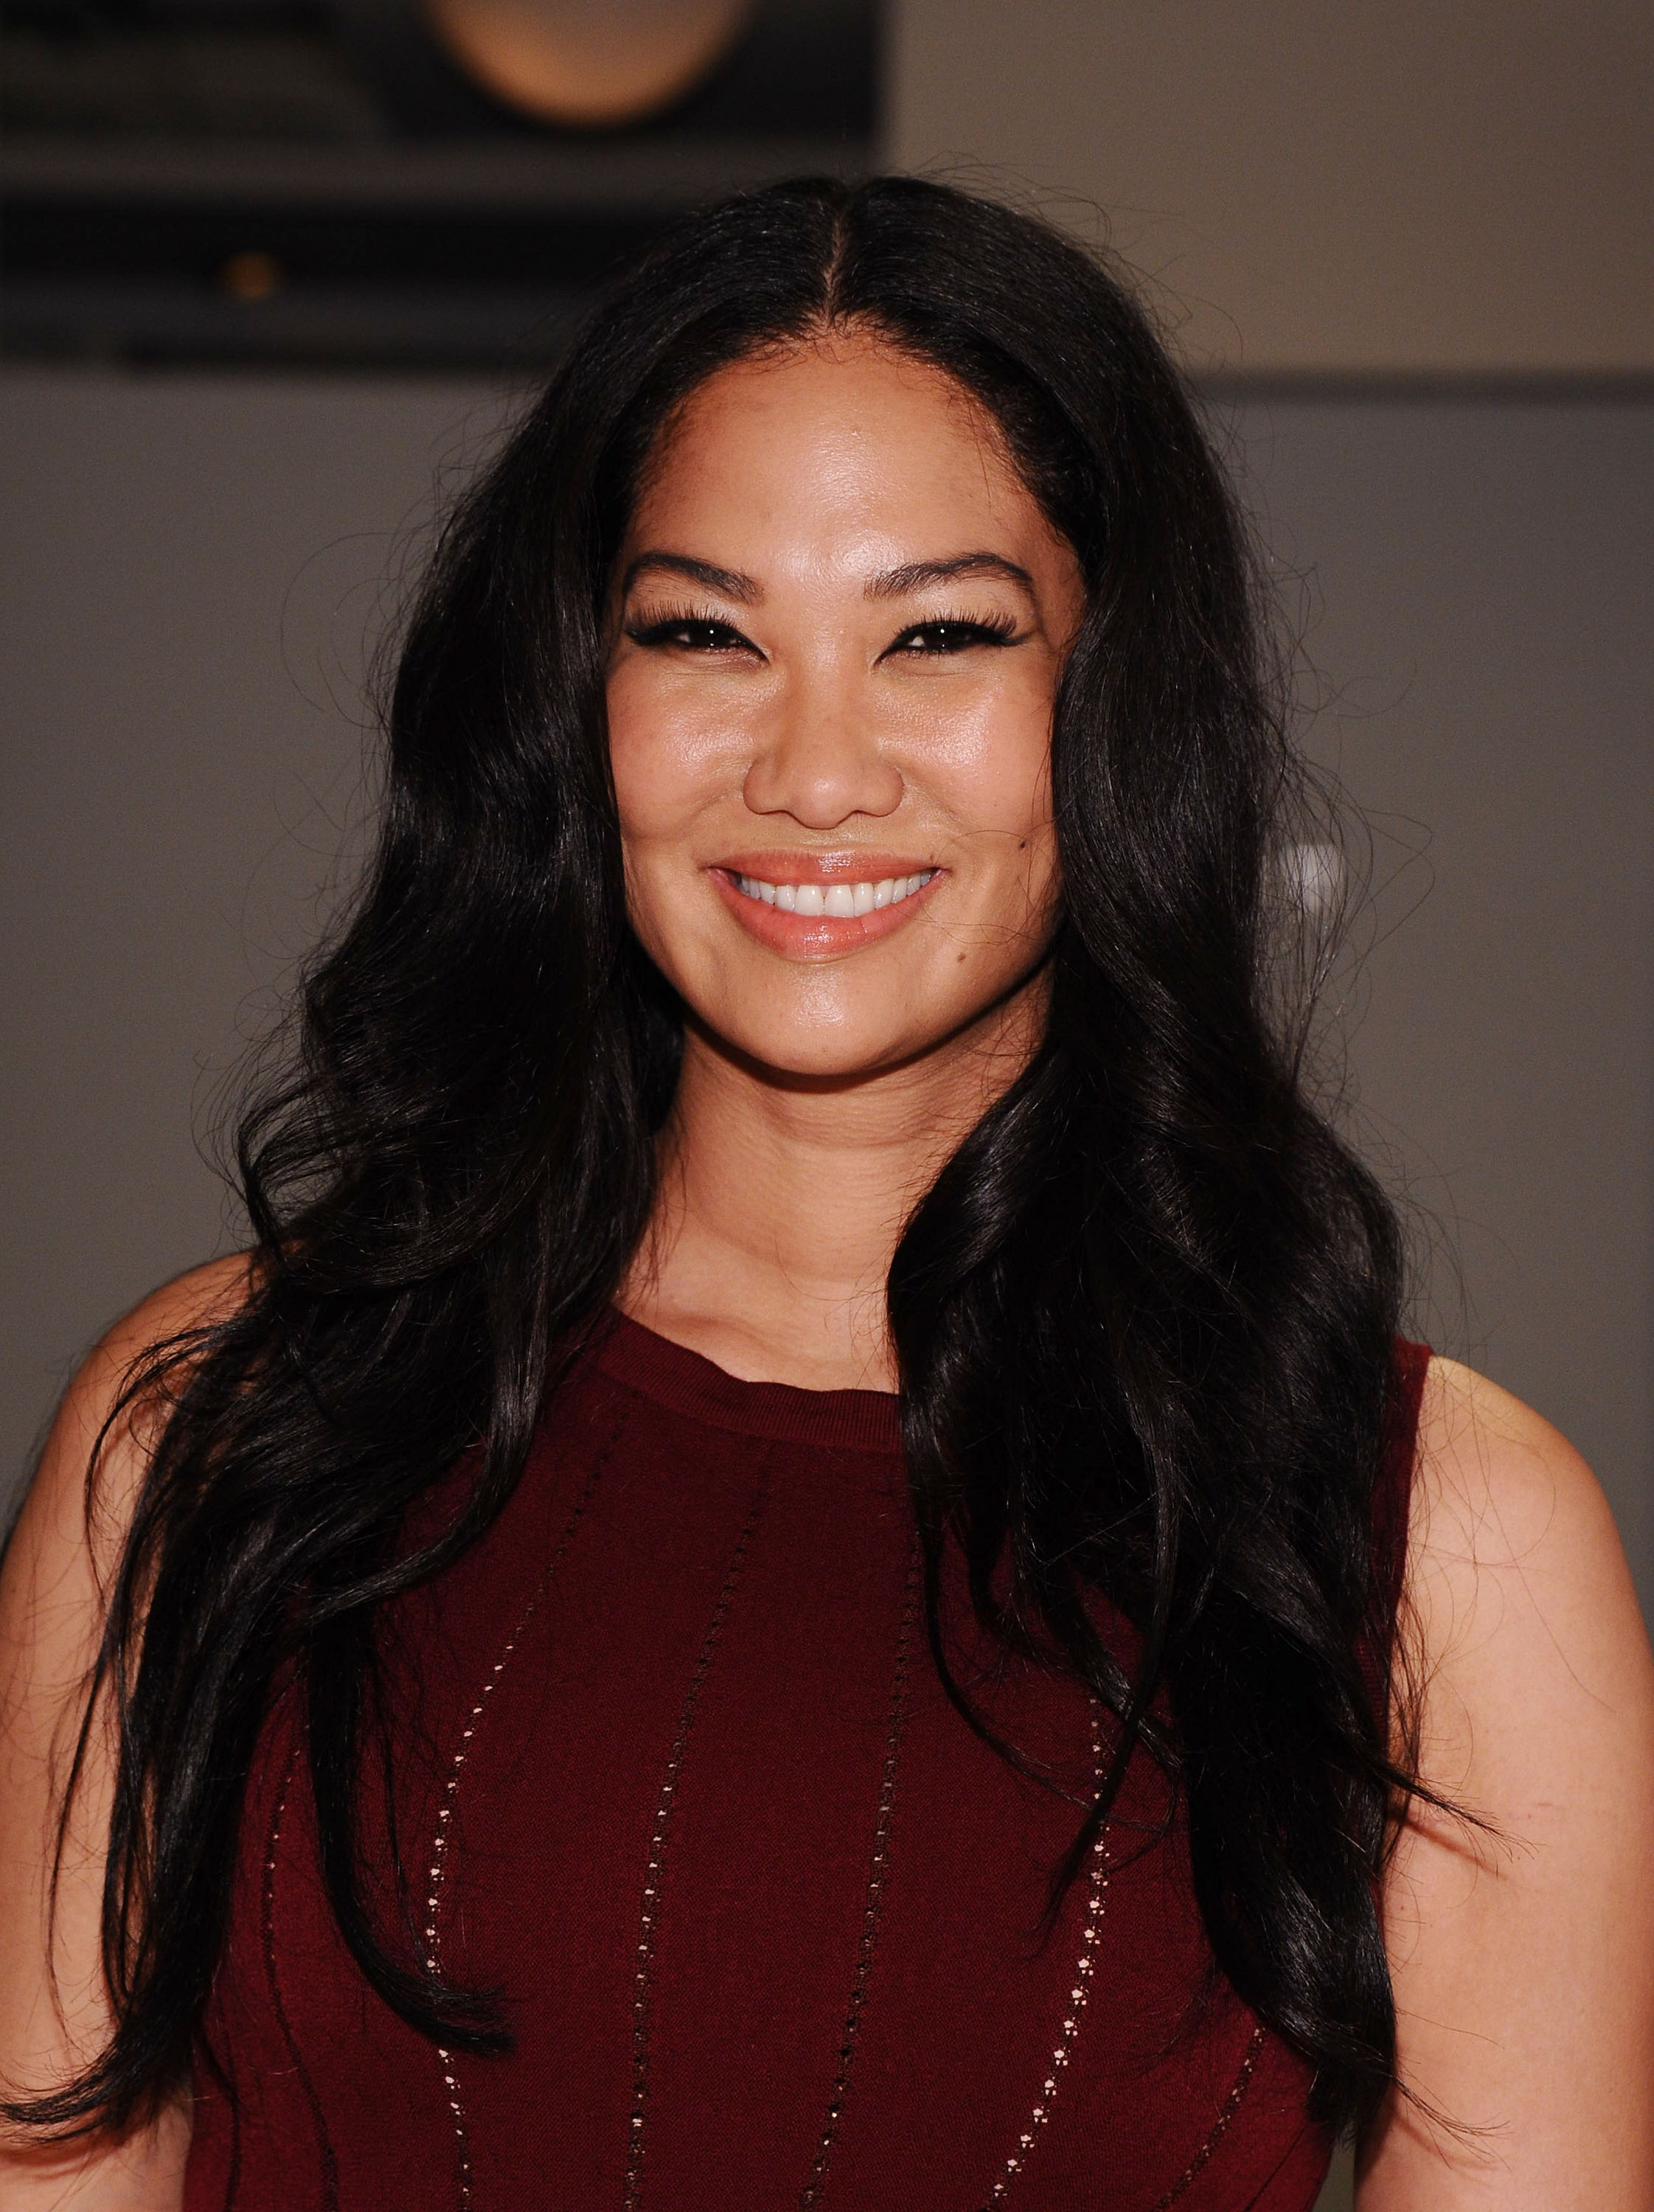 Kimora Lee Simmons at the Argyleculture By Russell Simmons fashion show on September 5, 2014. | Photo: Getty Images